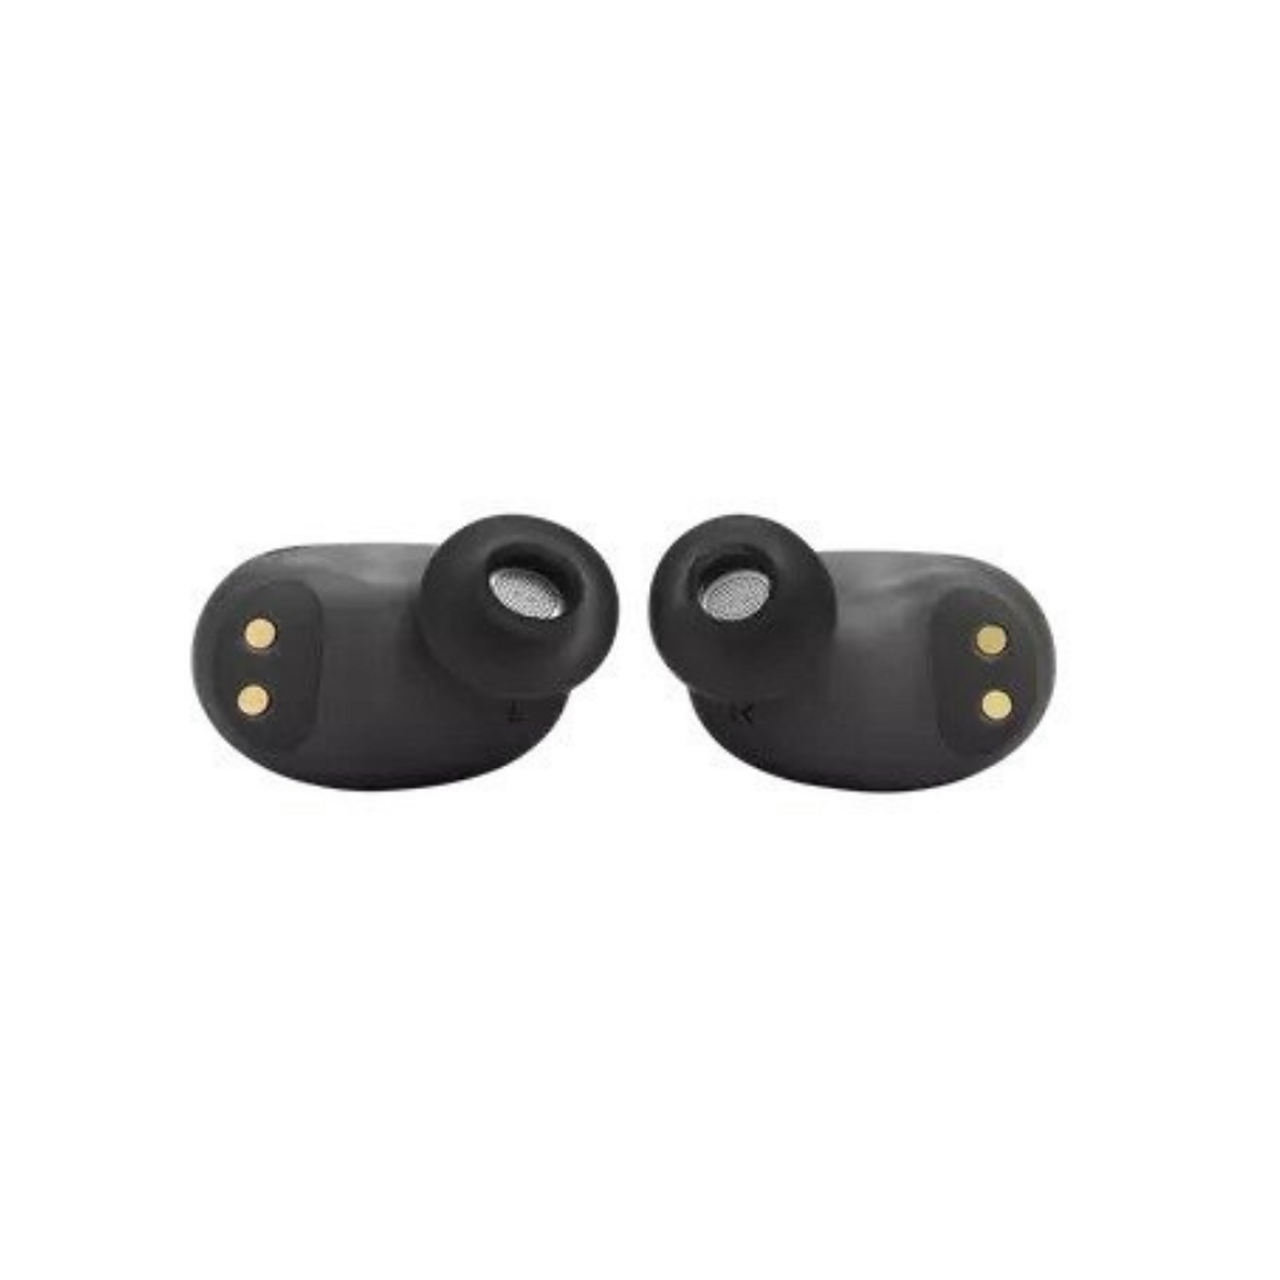 JBL® Live Free 2 True Active Noise Cancelling Earbuds - Black product image